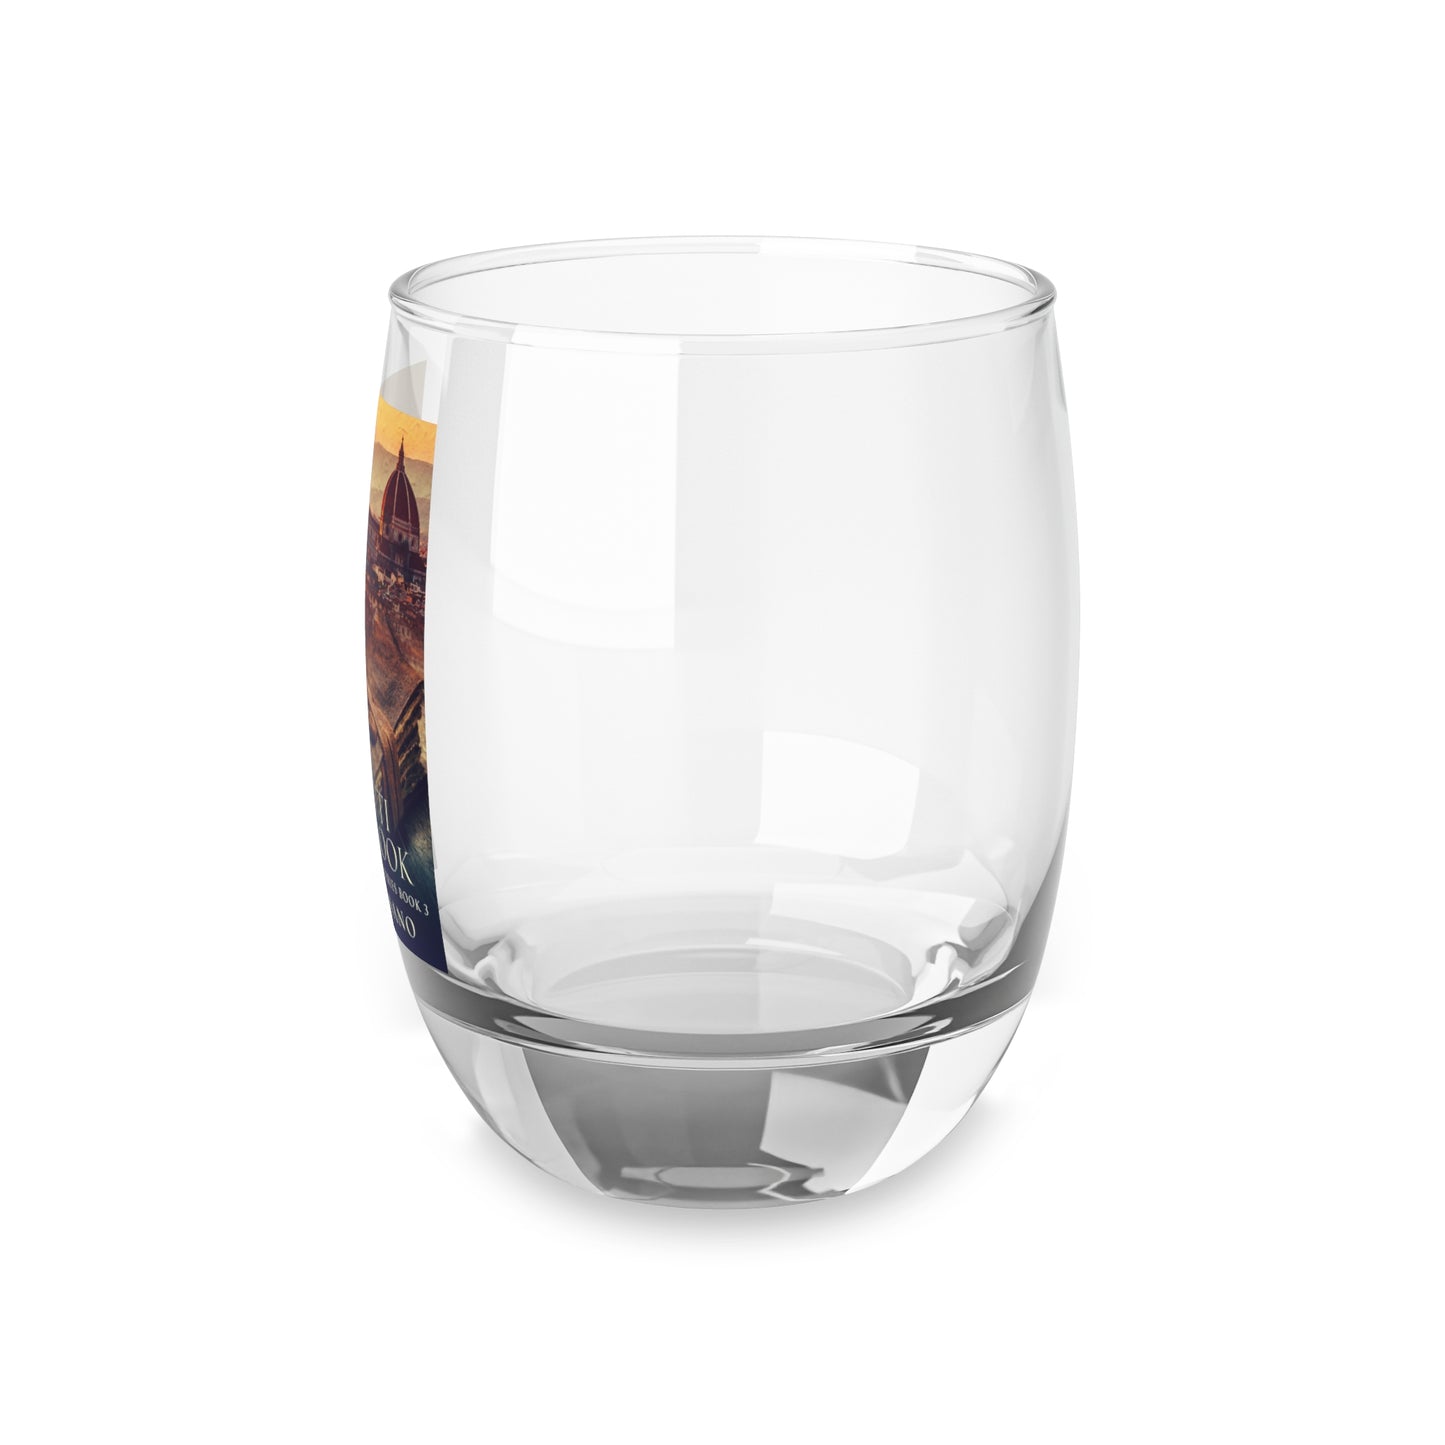 The Paletti Notebook - Whiskey Glass